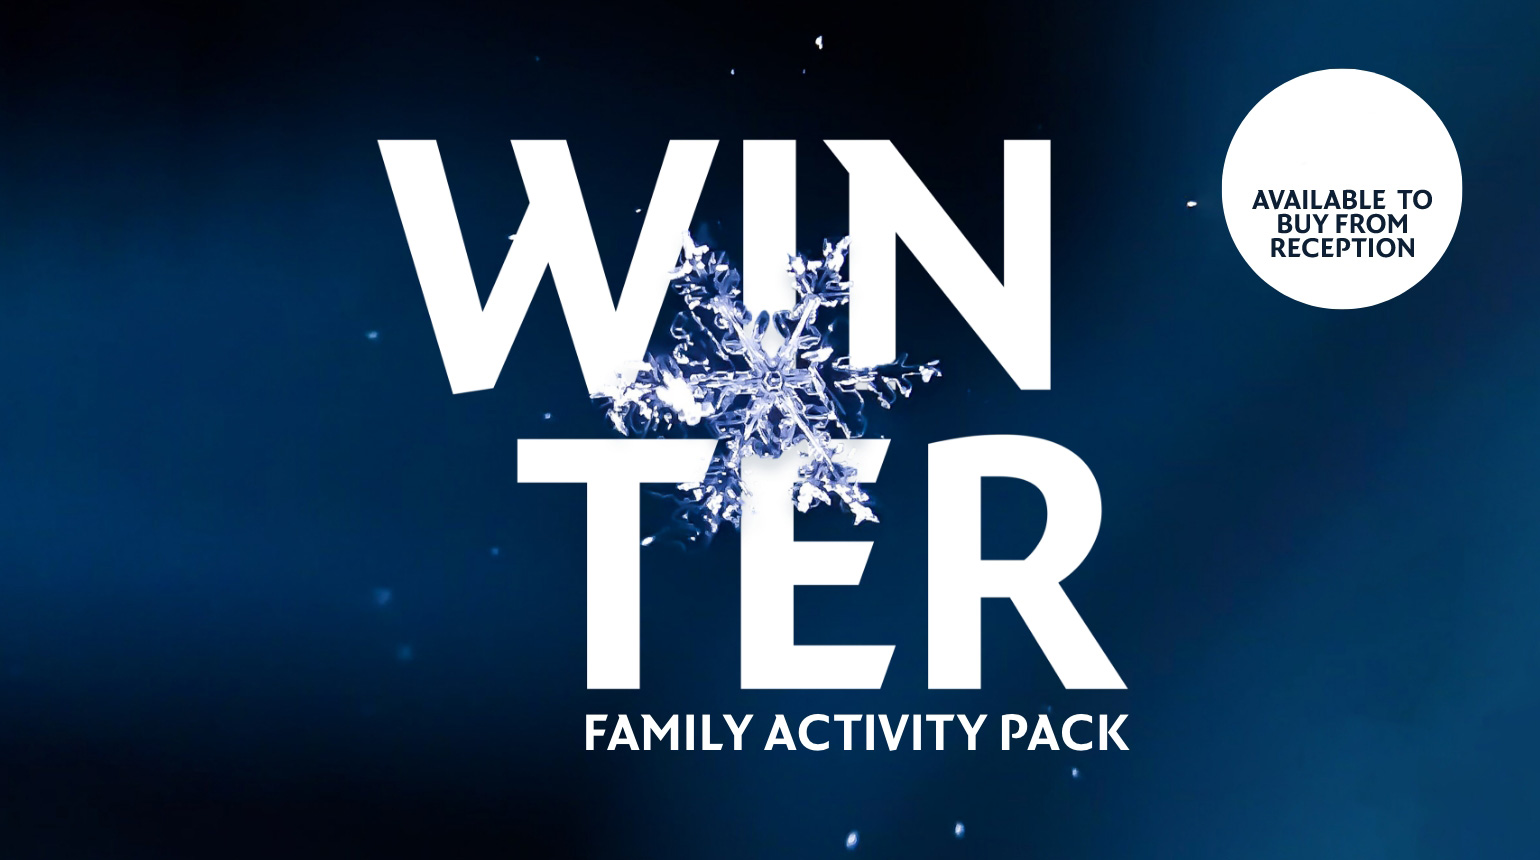 The word 'Winter' split over two lines with a sparkly snowflake in the middle on a dark blue background